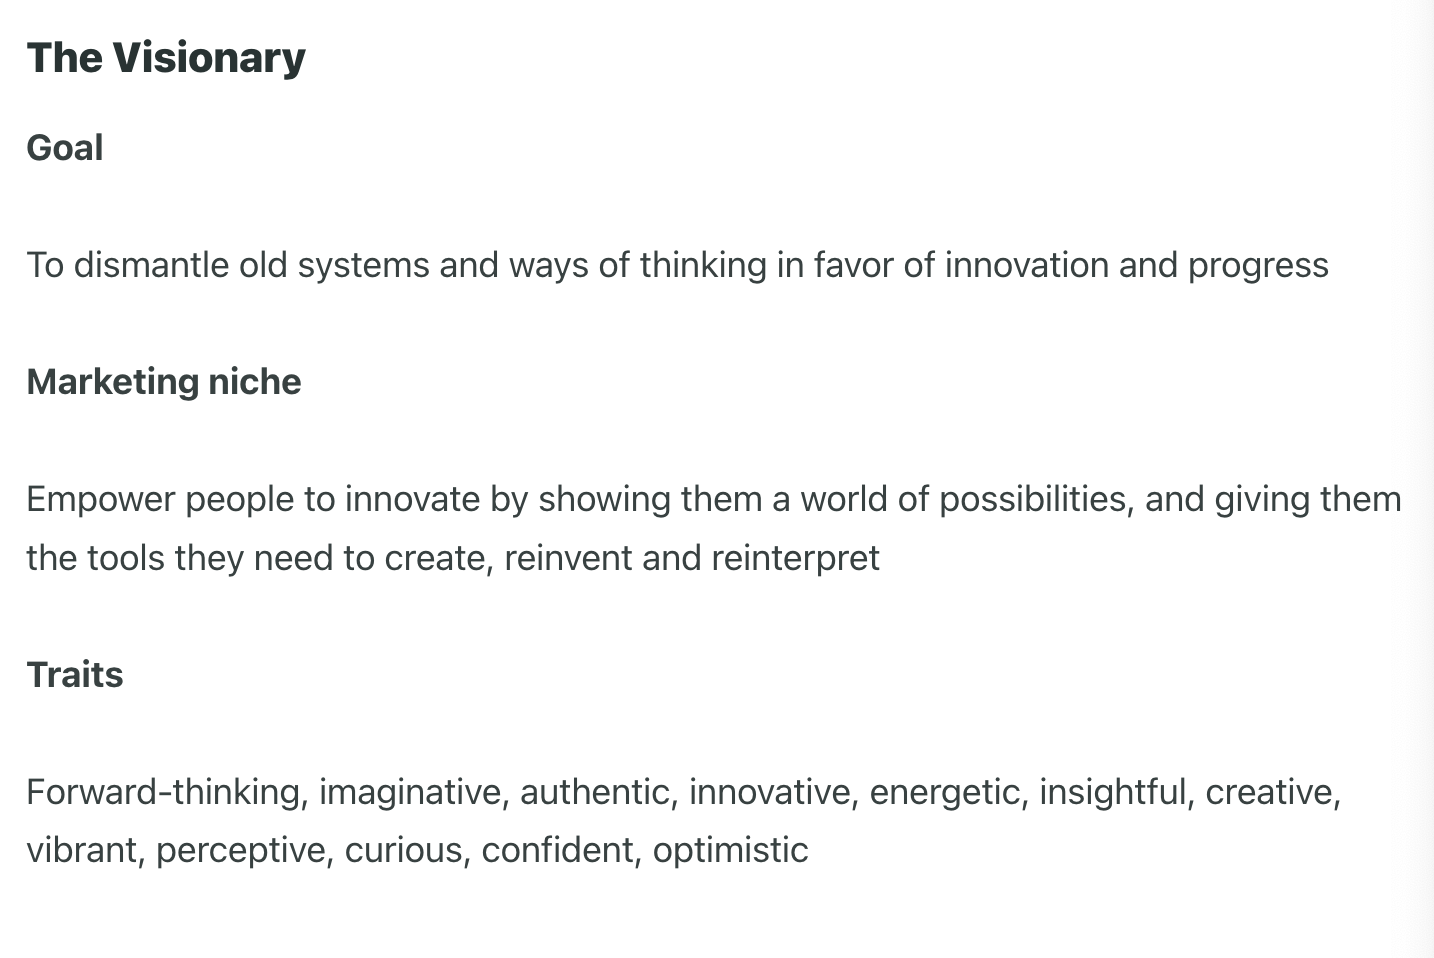 Screenshot from Sprout's Seeds brand guide detailing the goal, marketing niche and traits of the Visionary archetype. 